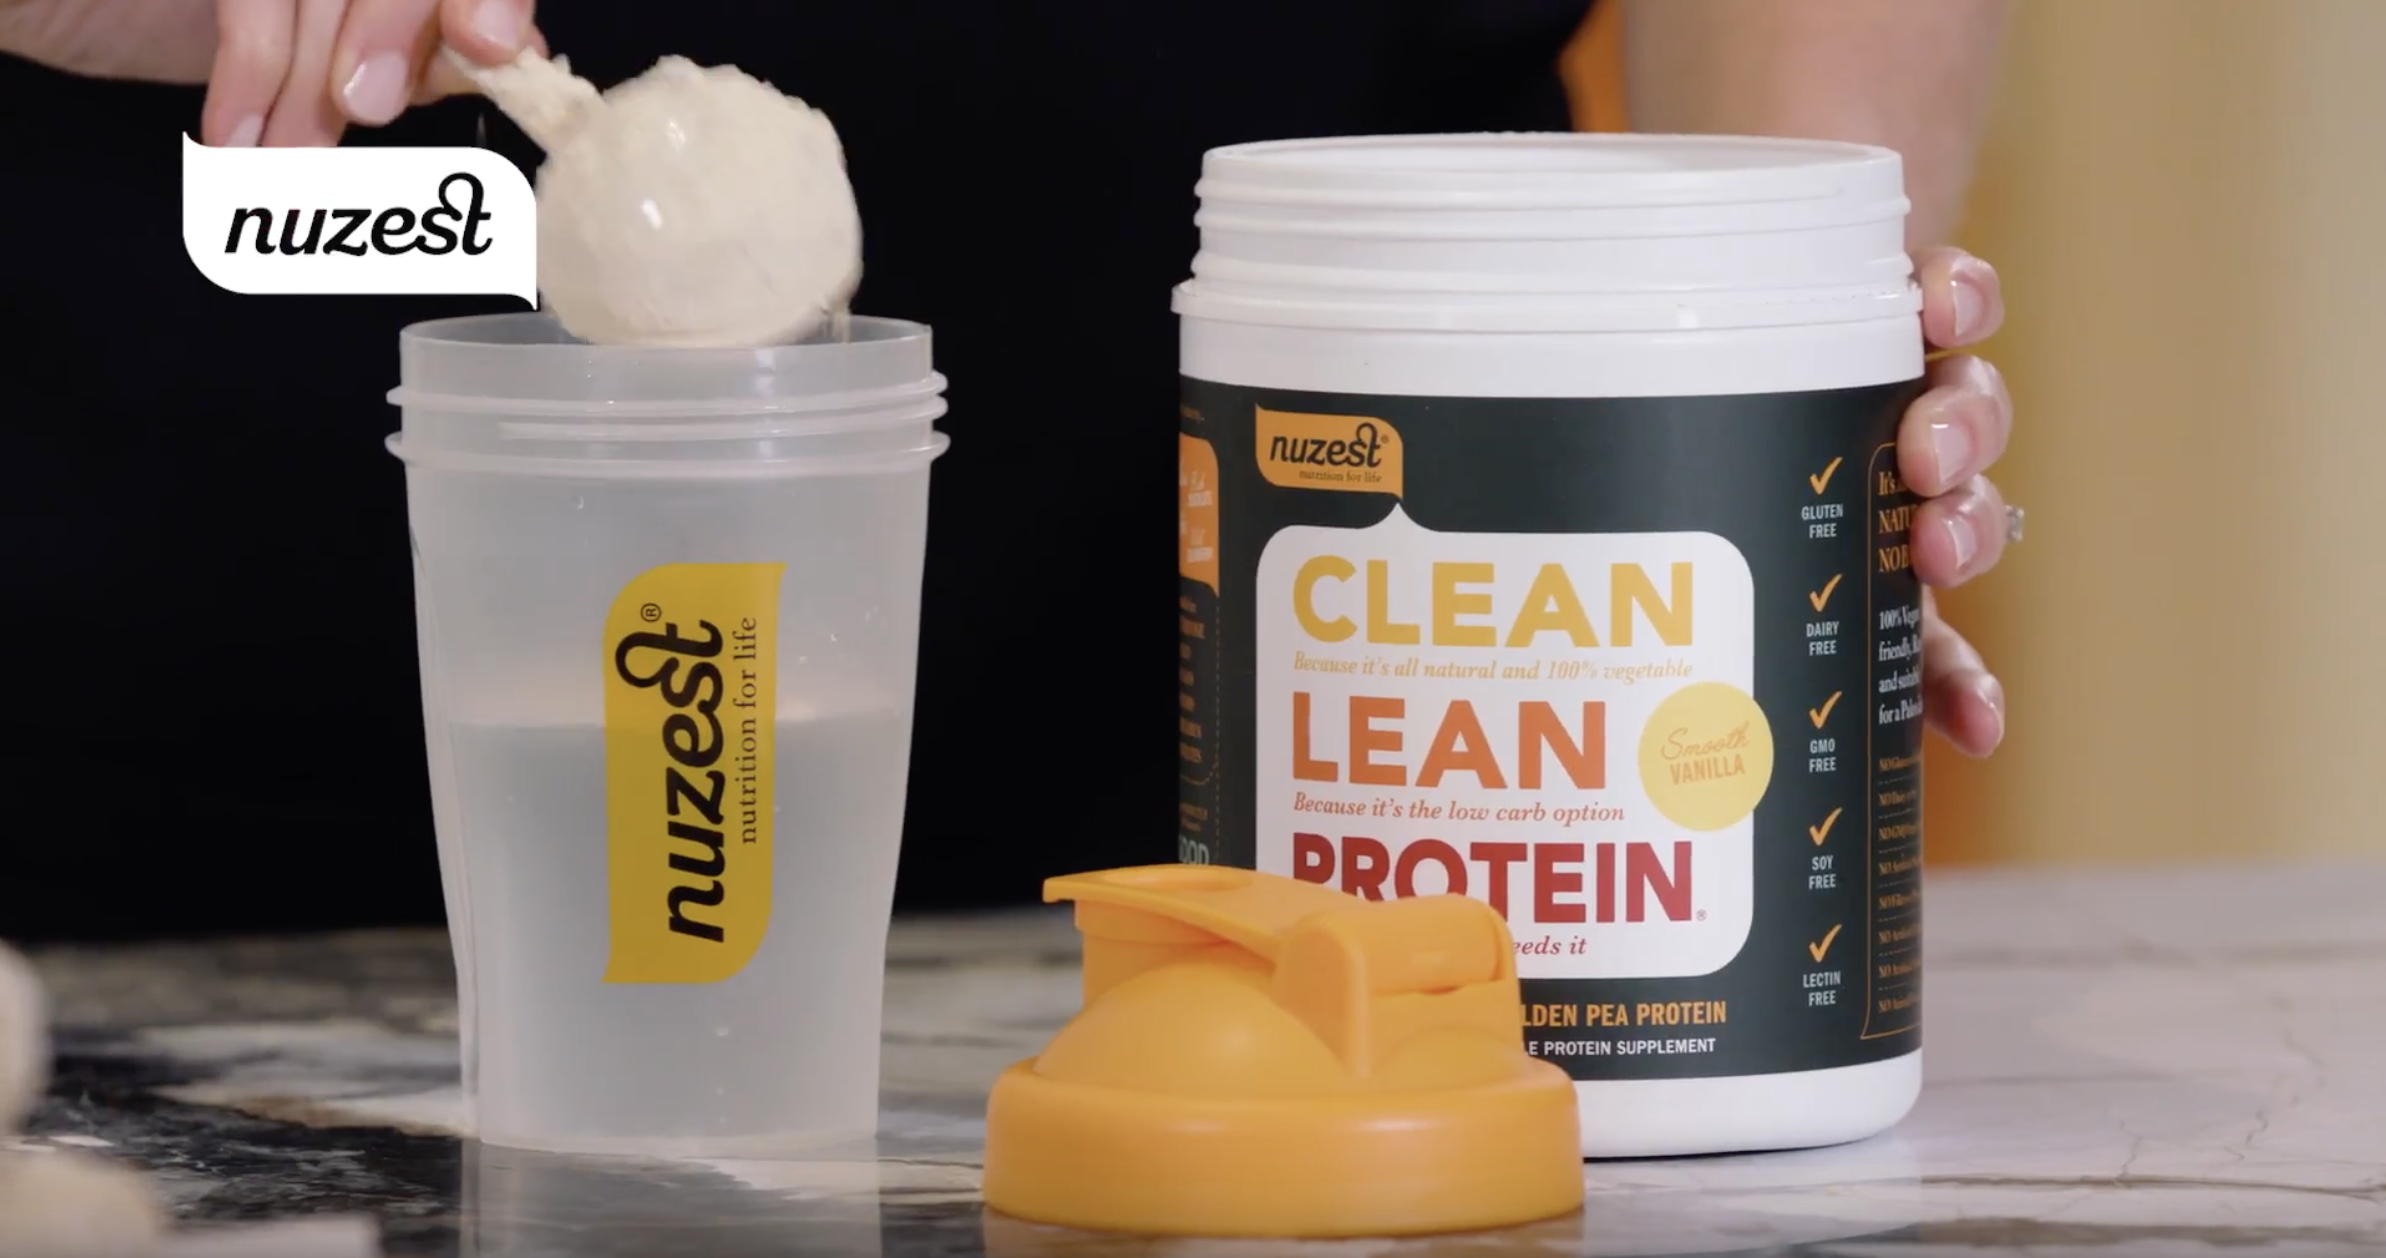 Clean Lean Protein Athletes Pack